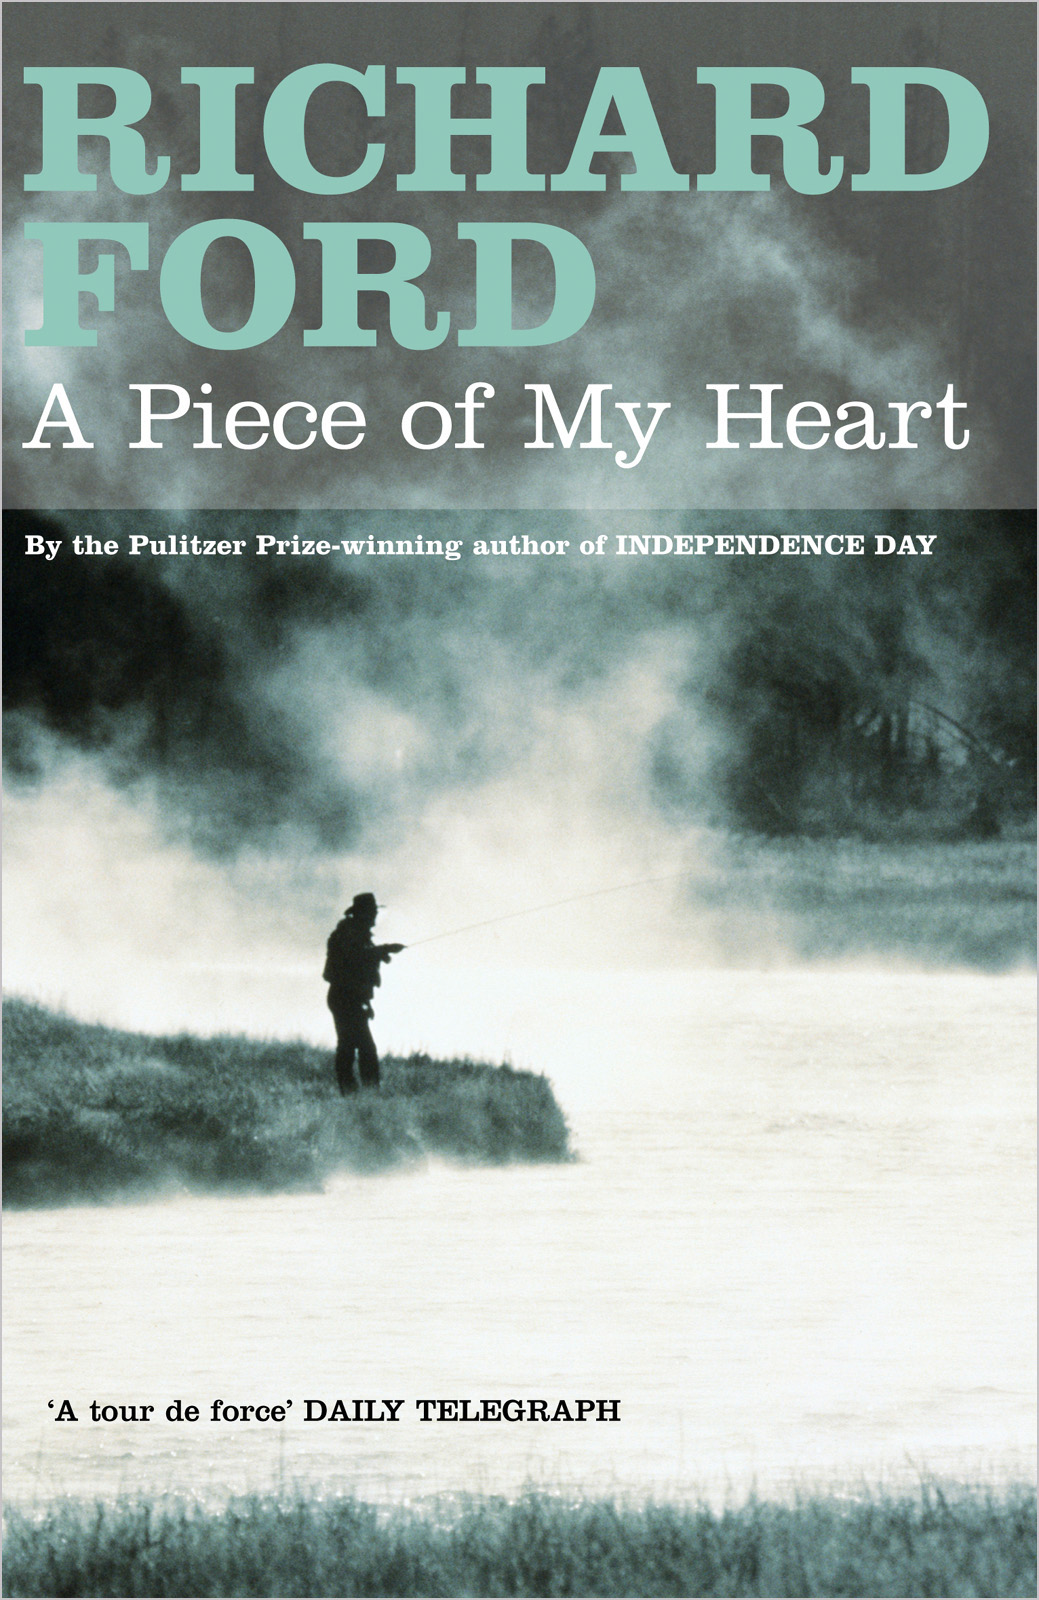 A Piece of My Heart (1976)